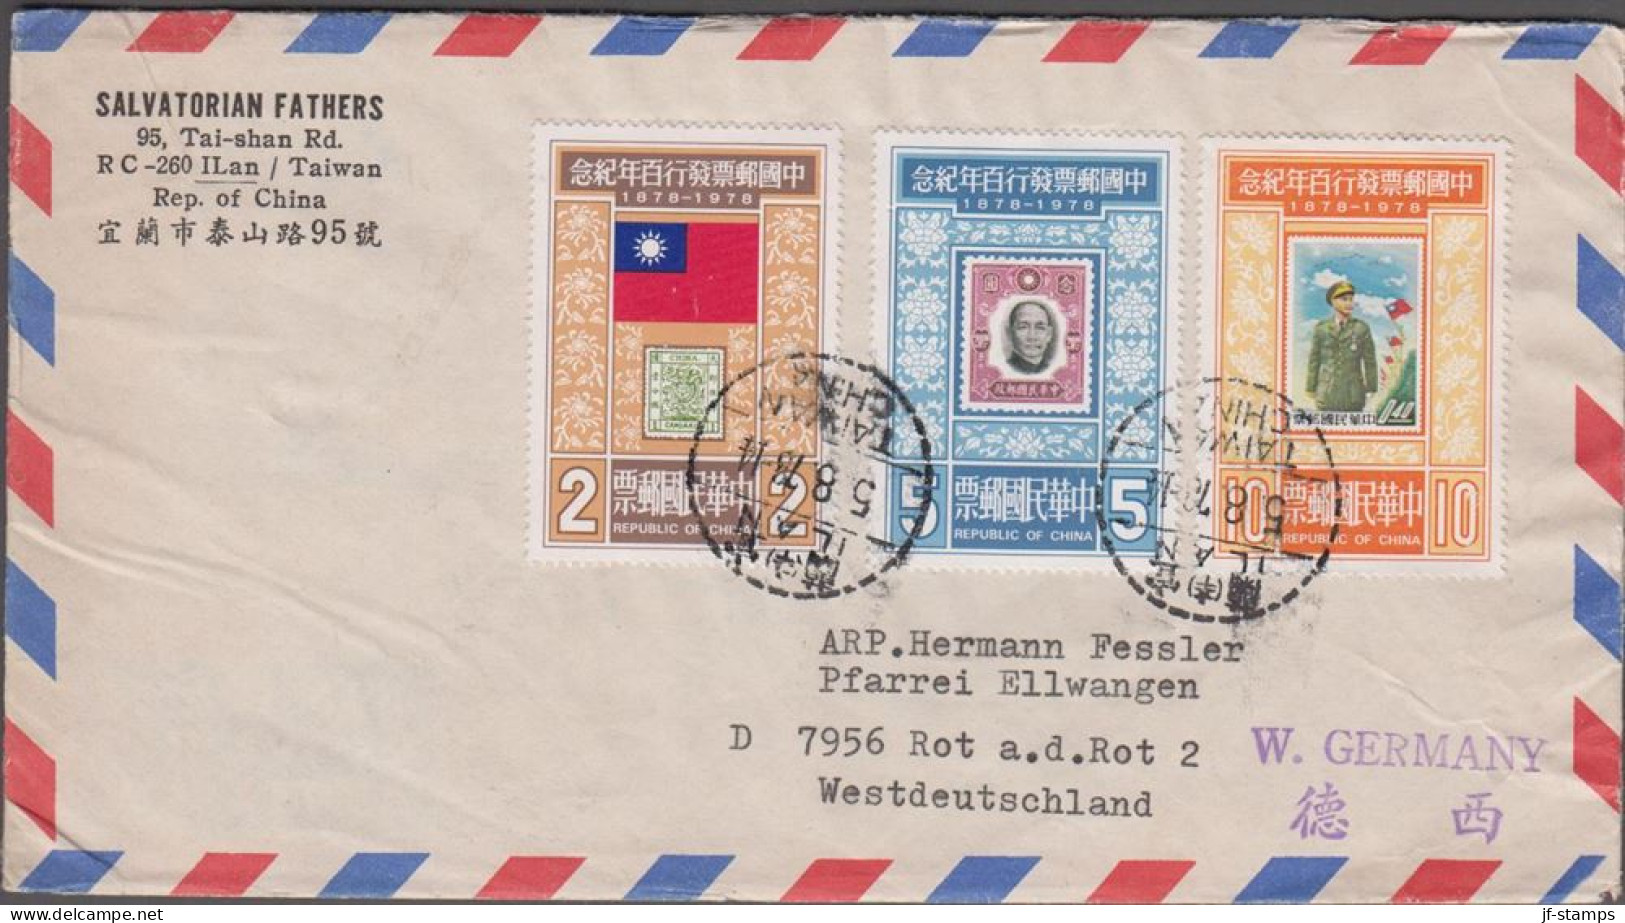 1978. TAIWAN. Complete Set 100 Years Stamps From China On Cover To Germany Cancelled TAIWAN 5 8 78. Sender... - JF524473 - Storia Postale